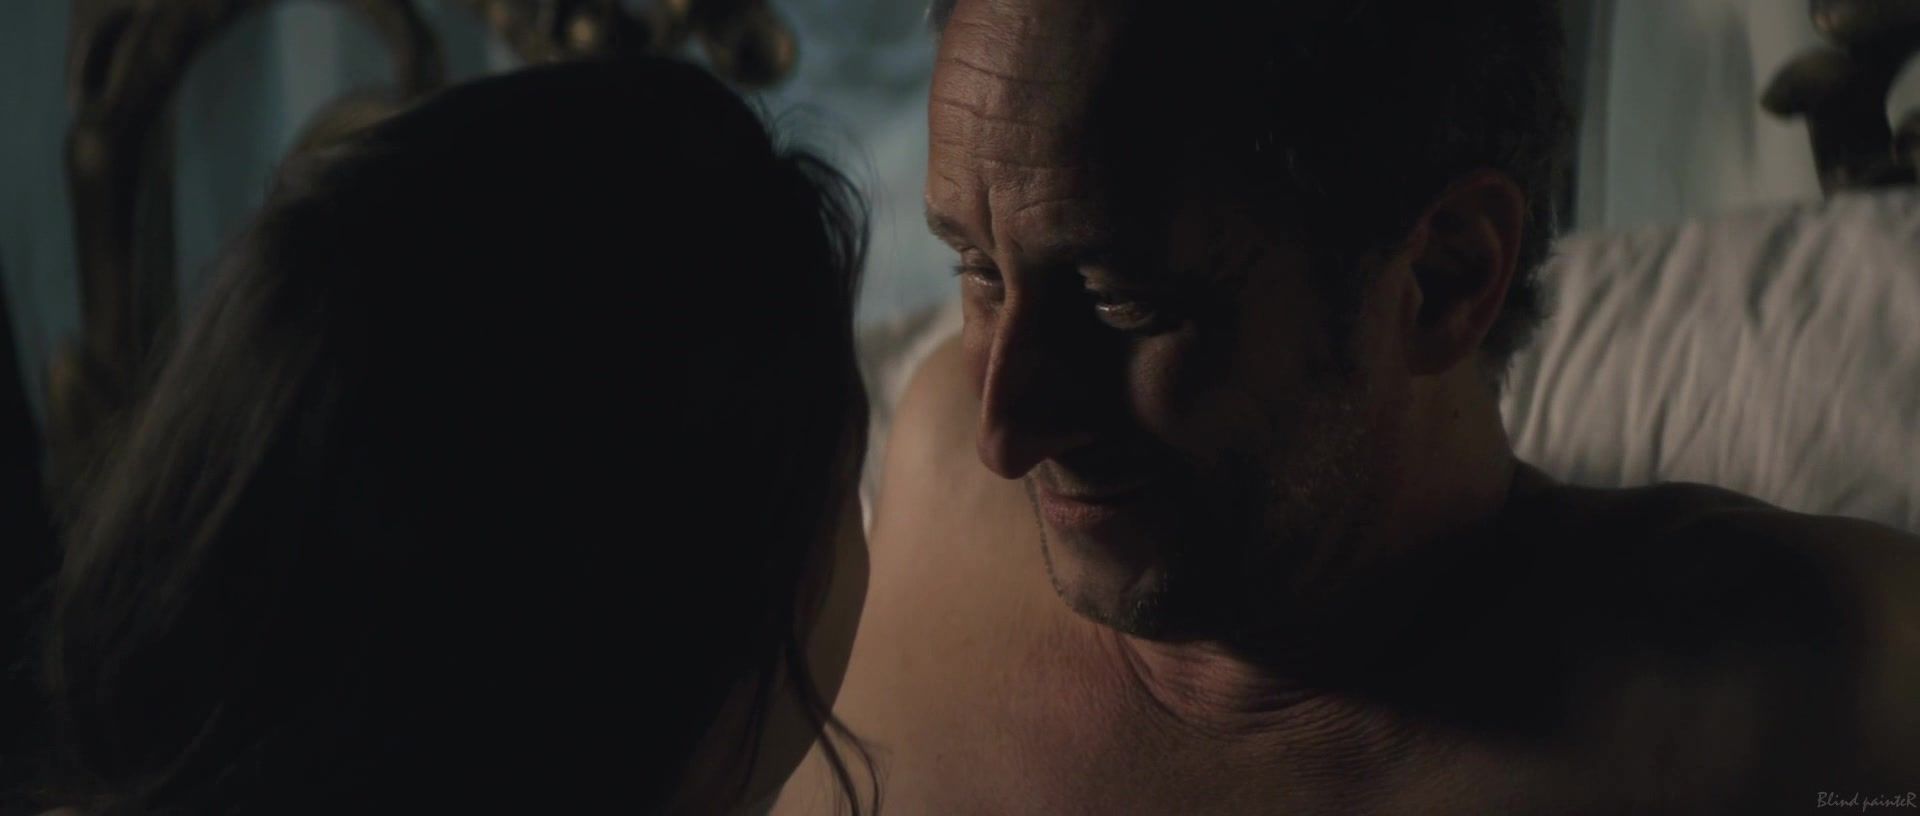 Pussyeating French sex scene | Charlotte Le Bon nude - Le Grand Mechant Loup (2013) PornDT